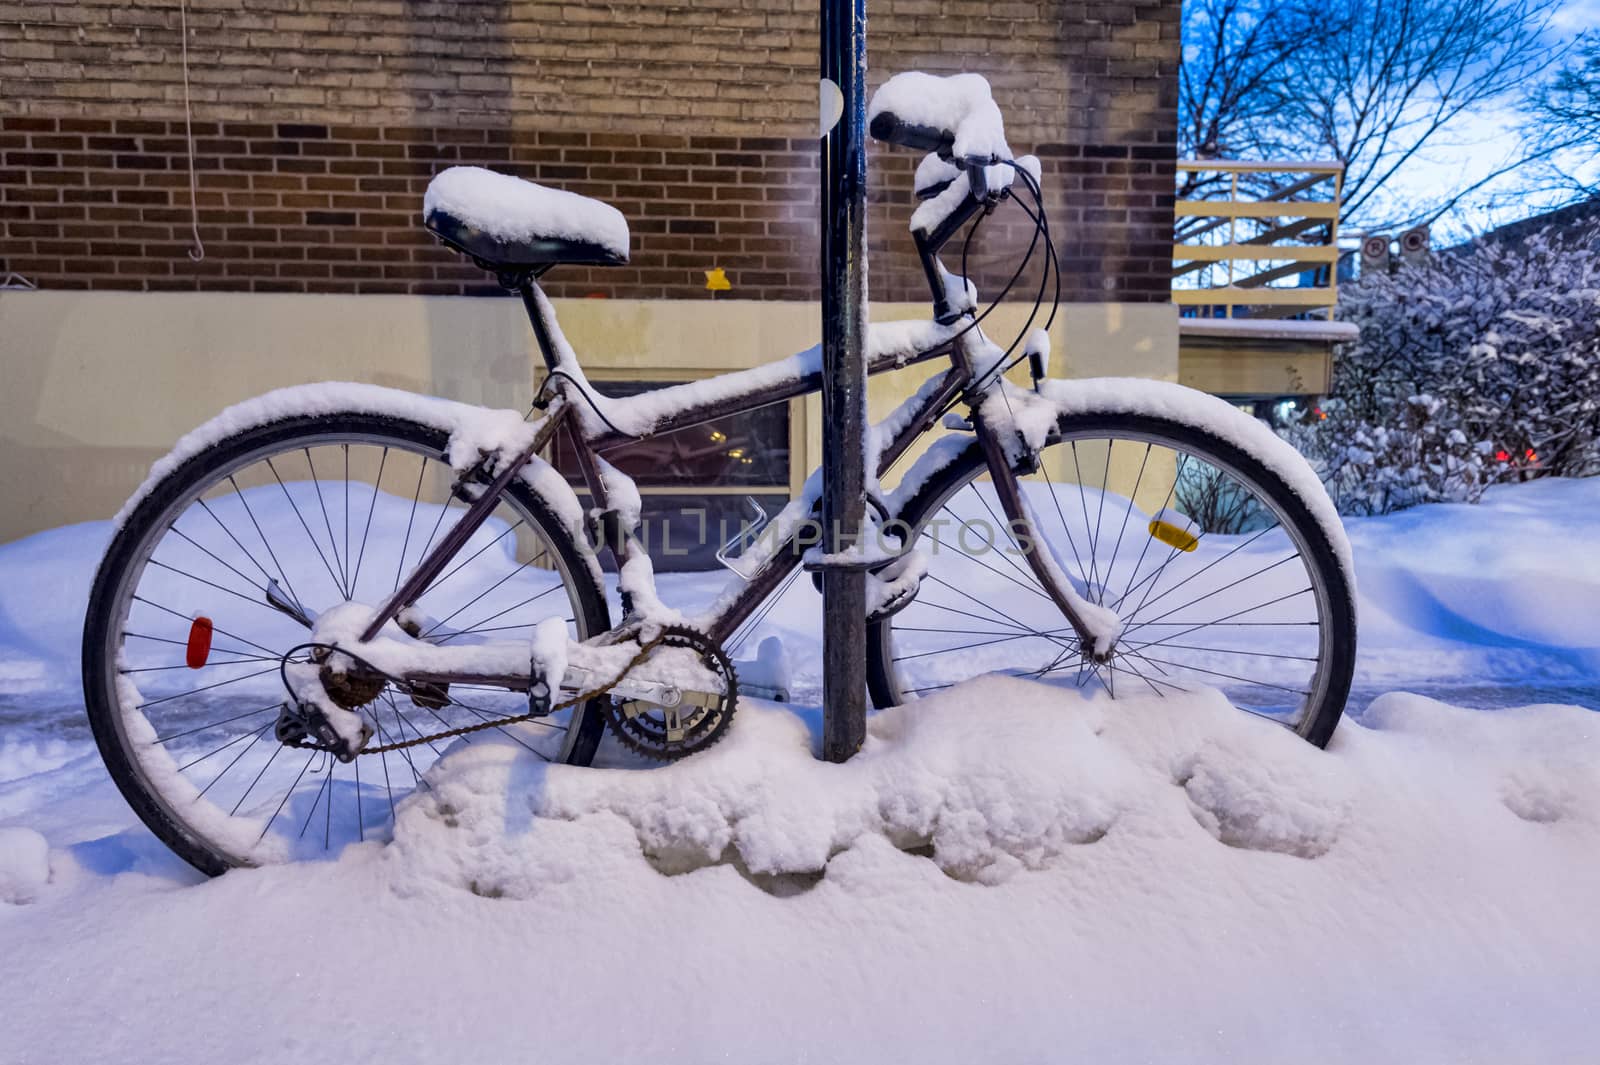 Bike covered in snow during snow storm by mbruxelle